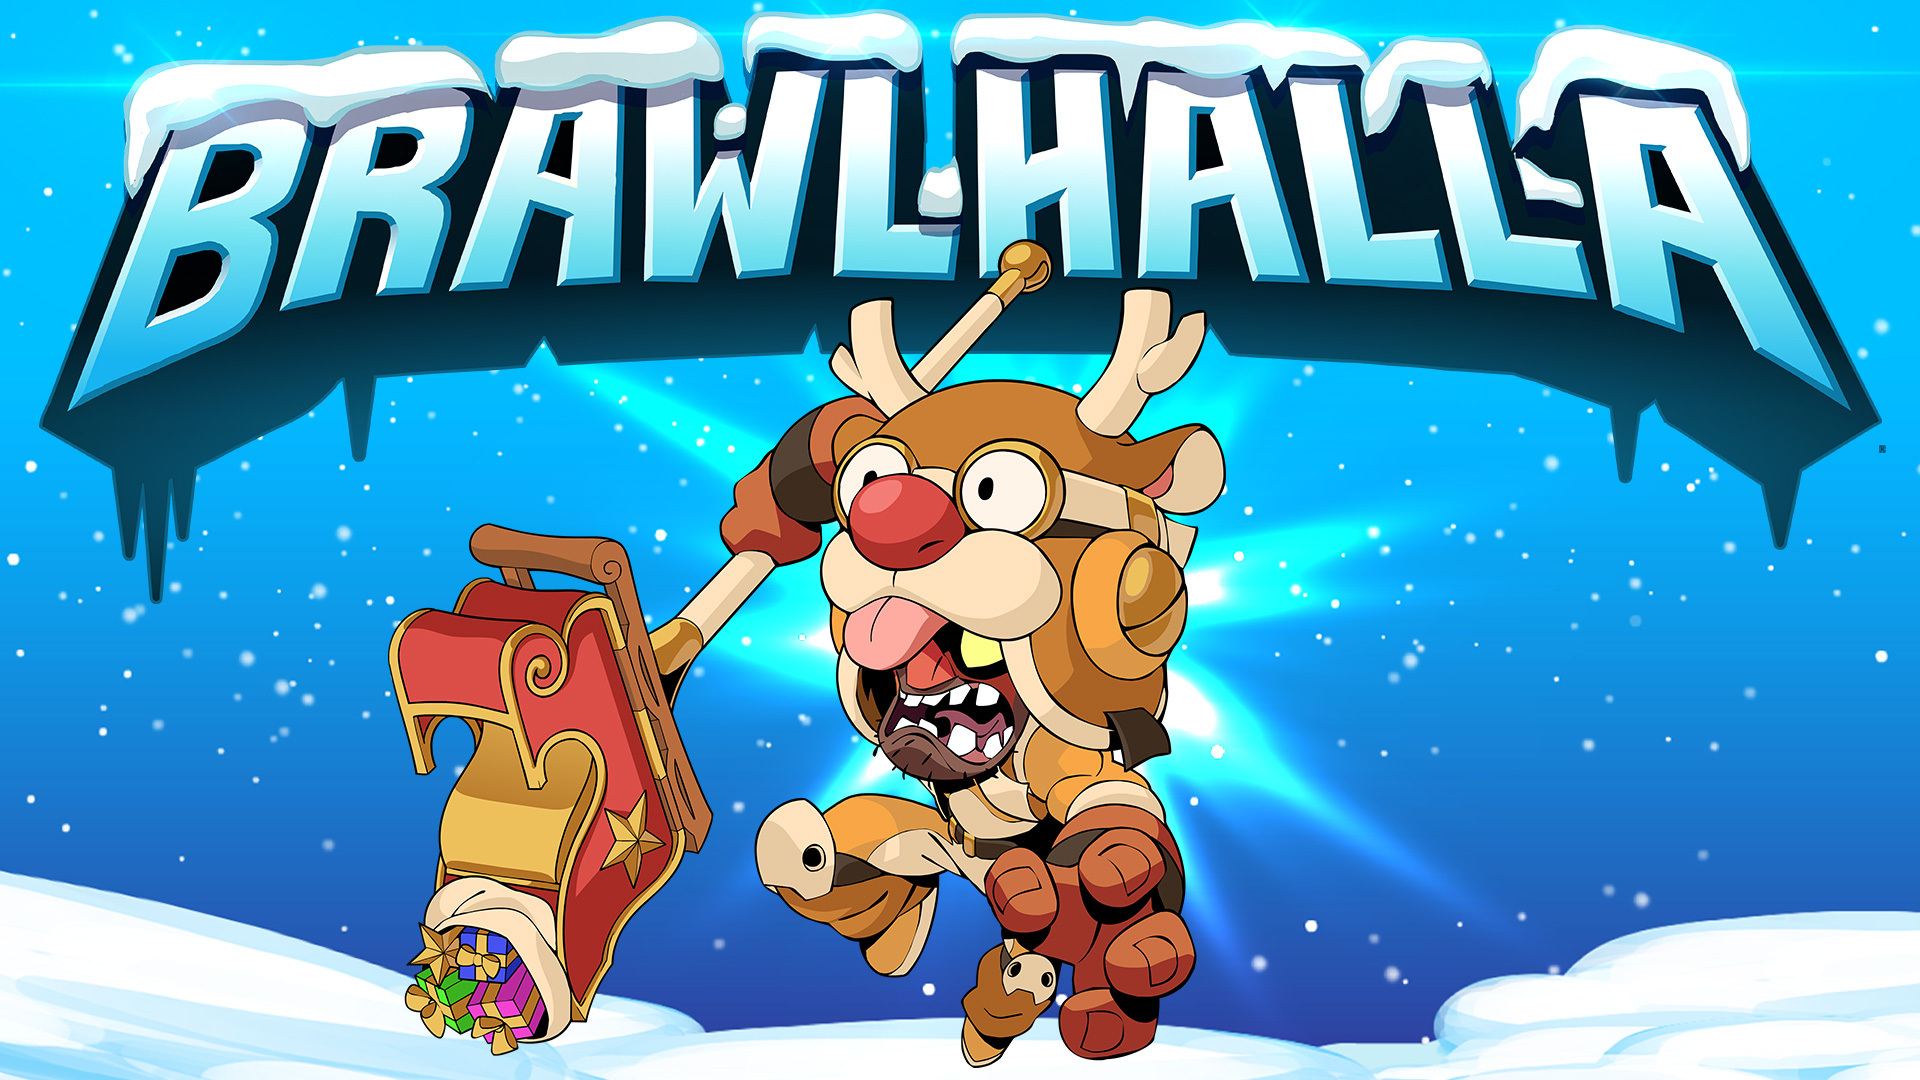 Get Ready for the Brawlhallidays 2021!